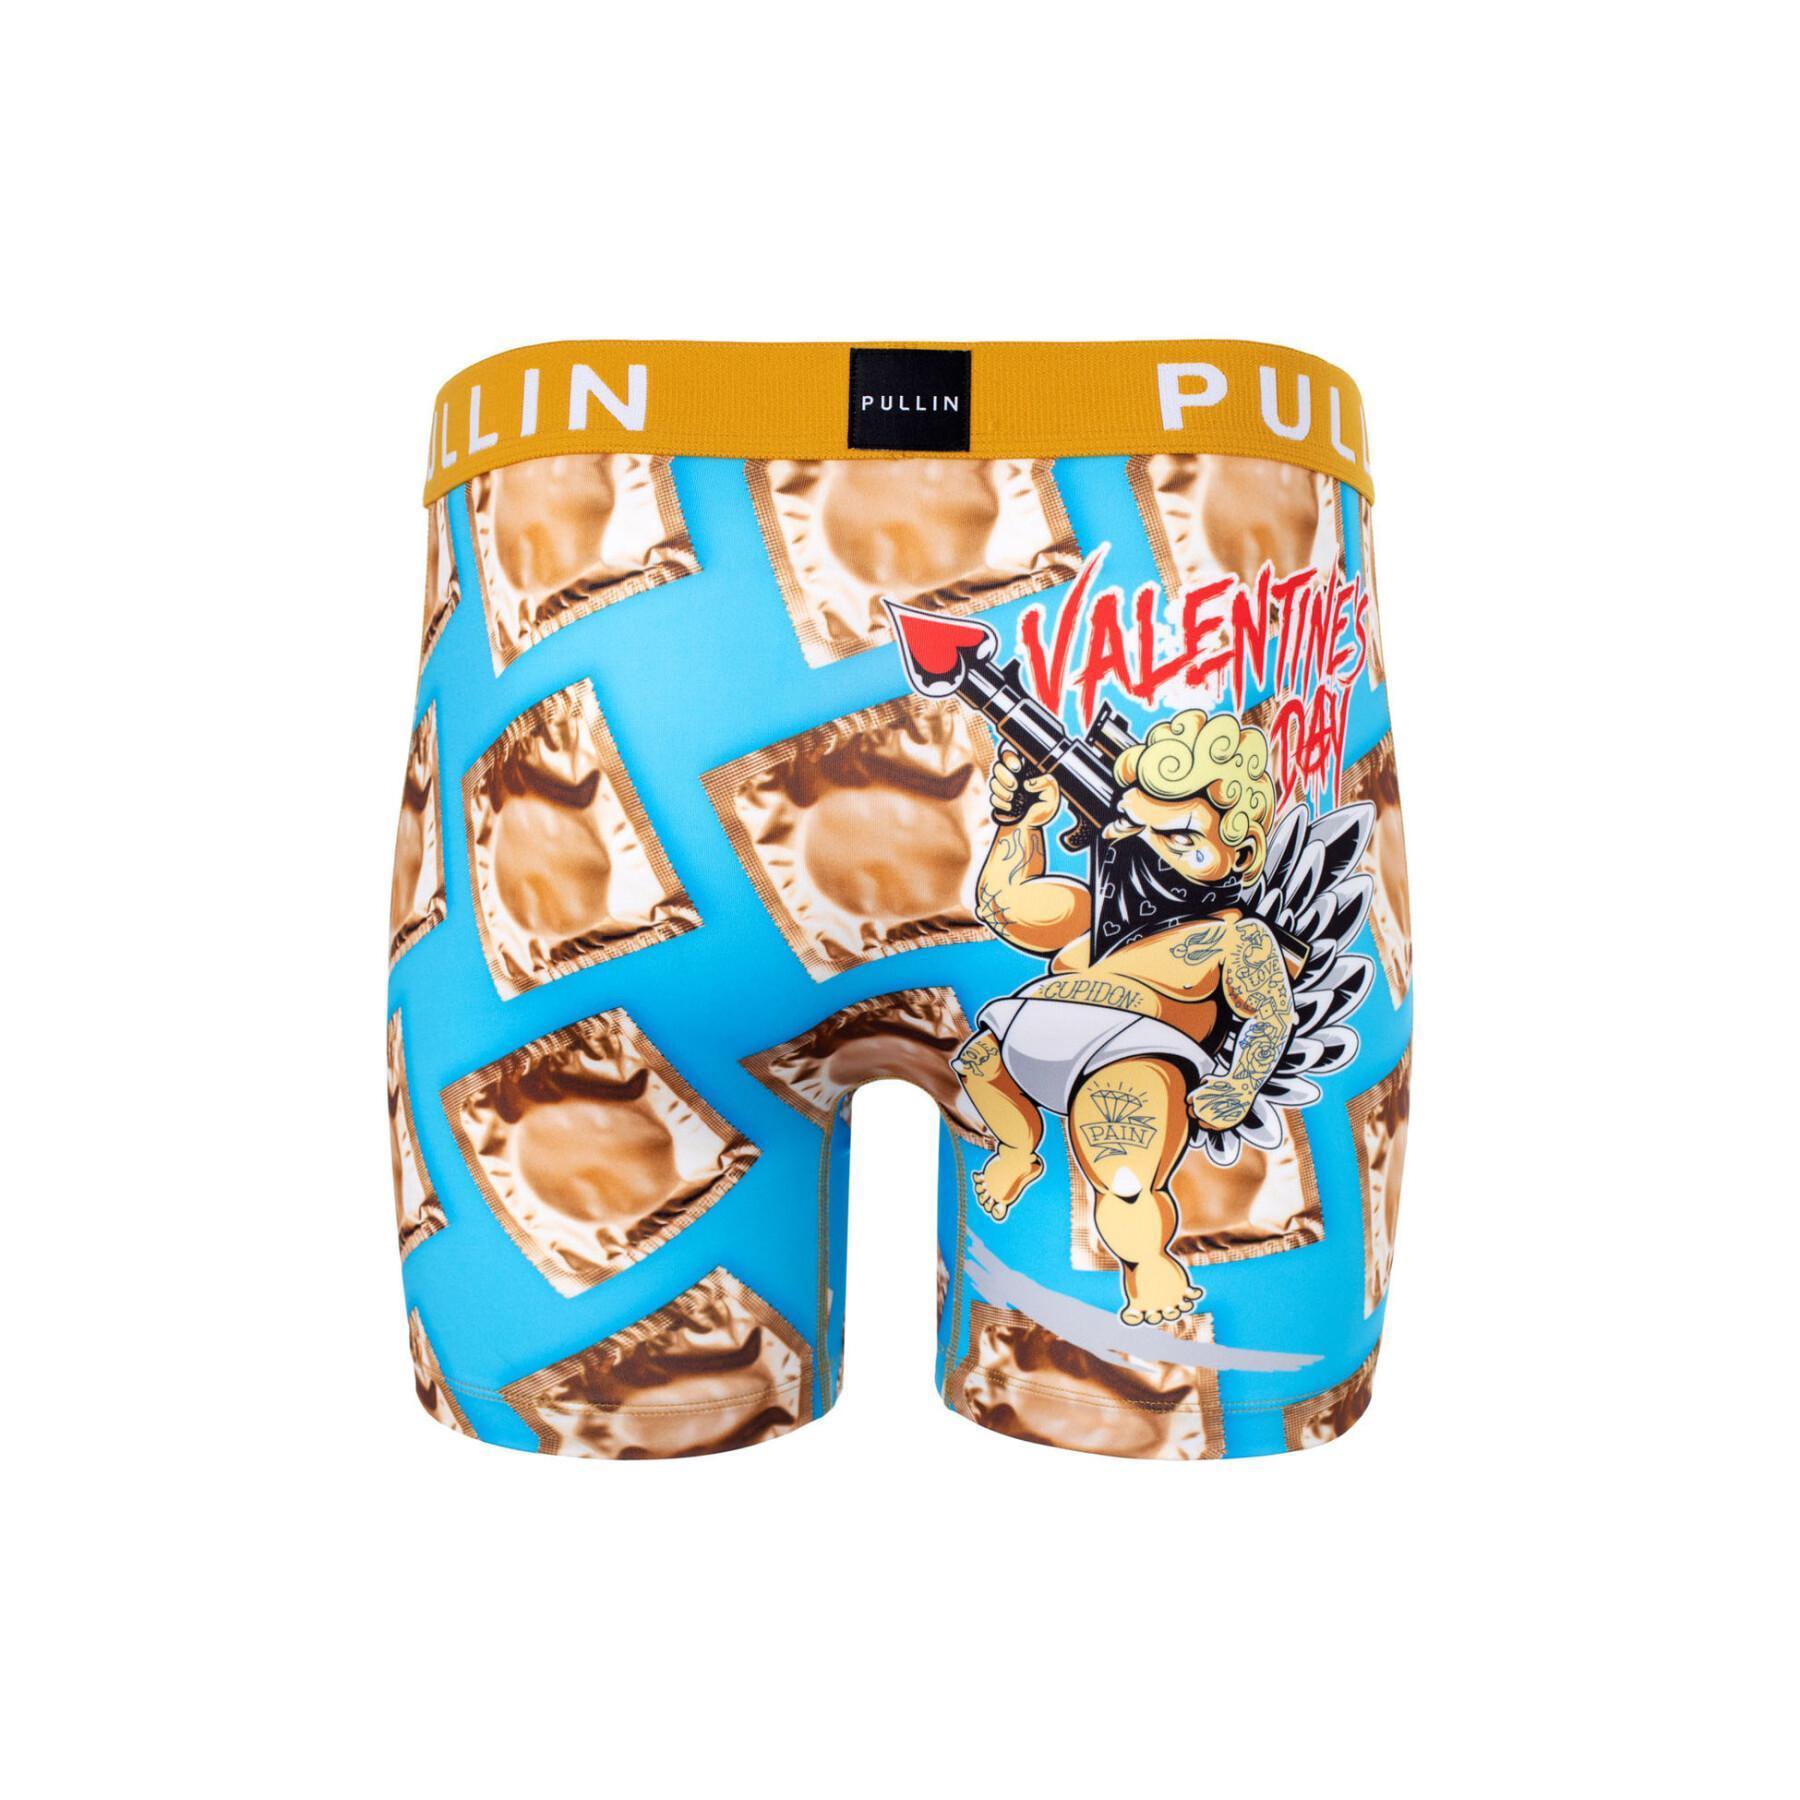 Boxer Pull-in fashion 2 cupidon